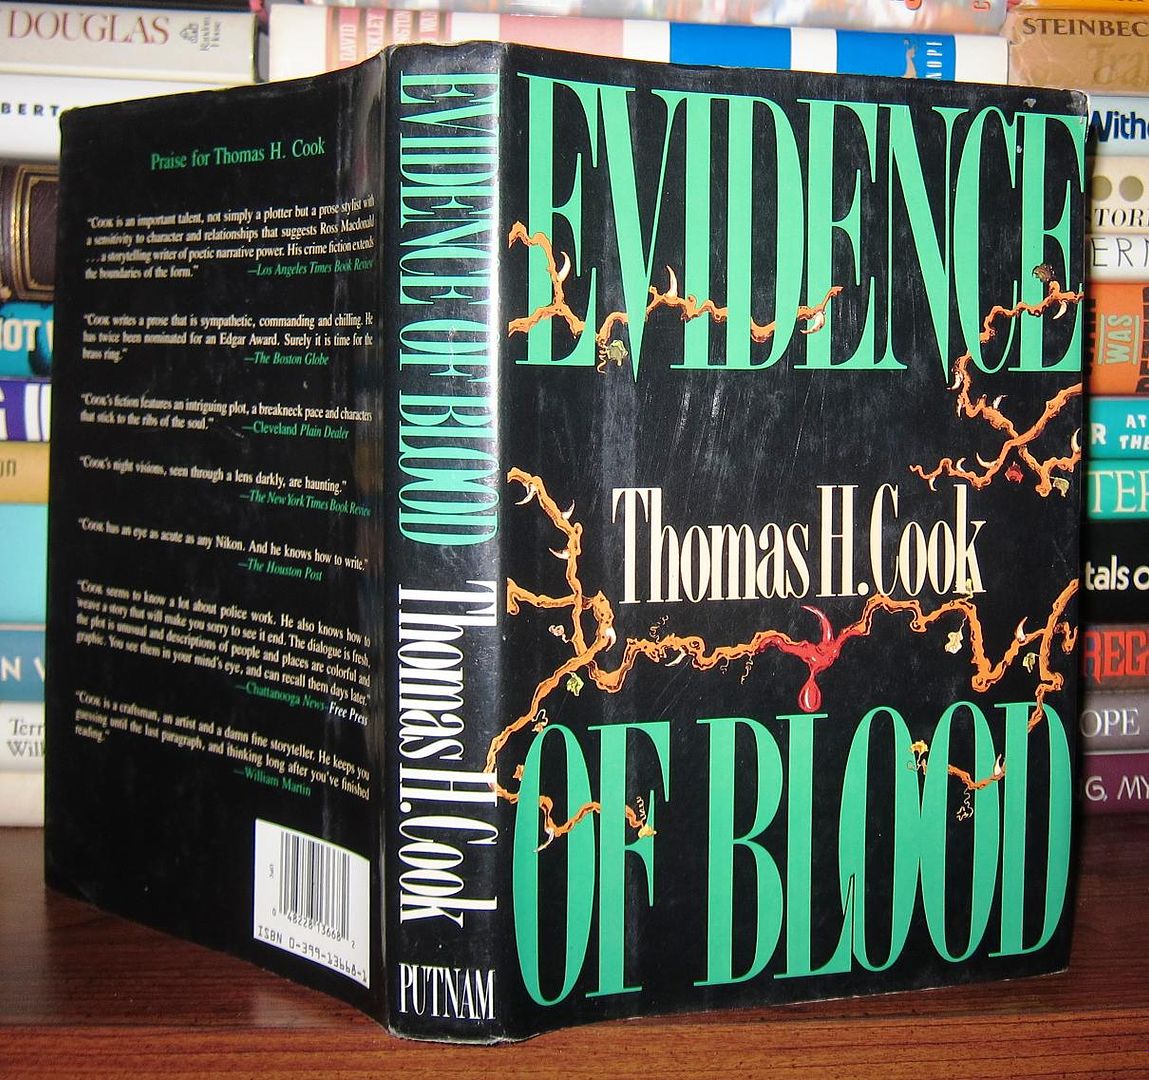 COOK, THOMAS H. - Evidence of Blood